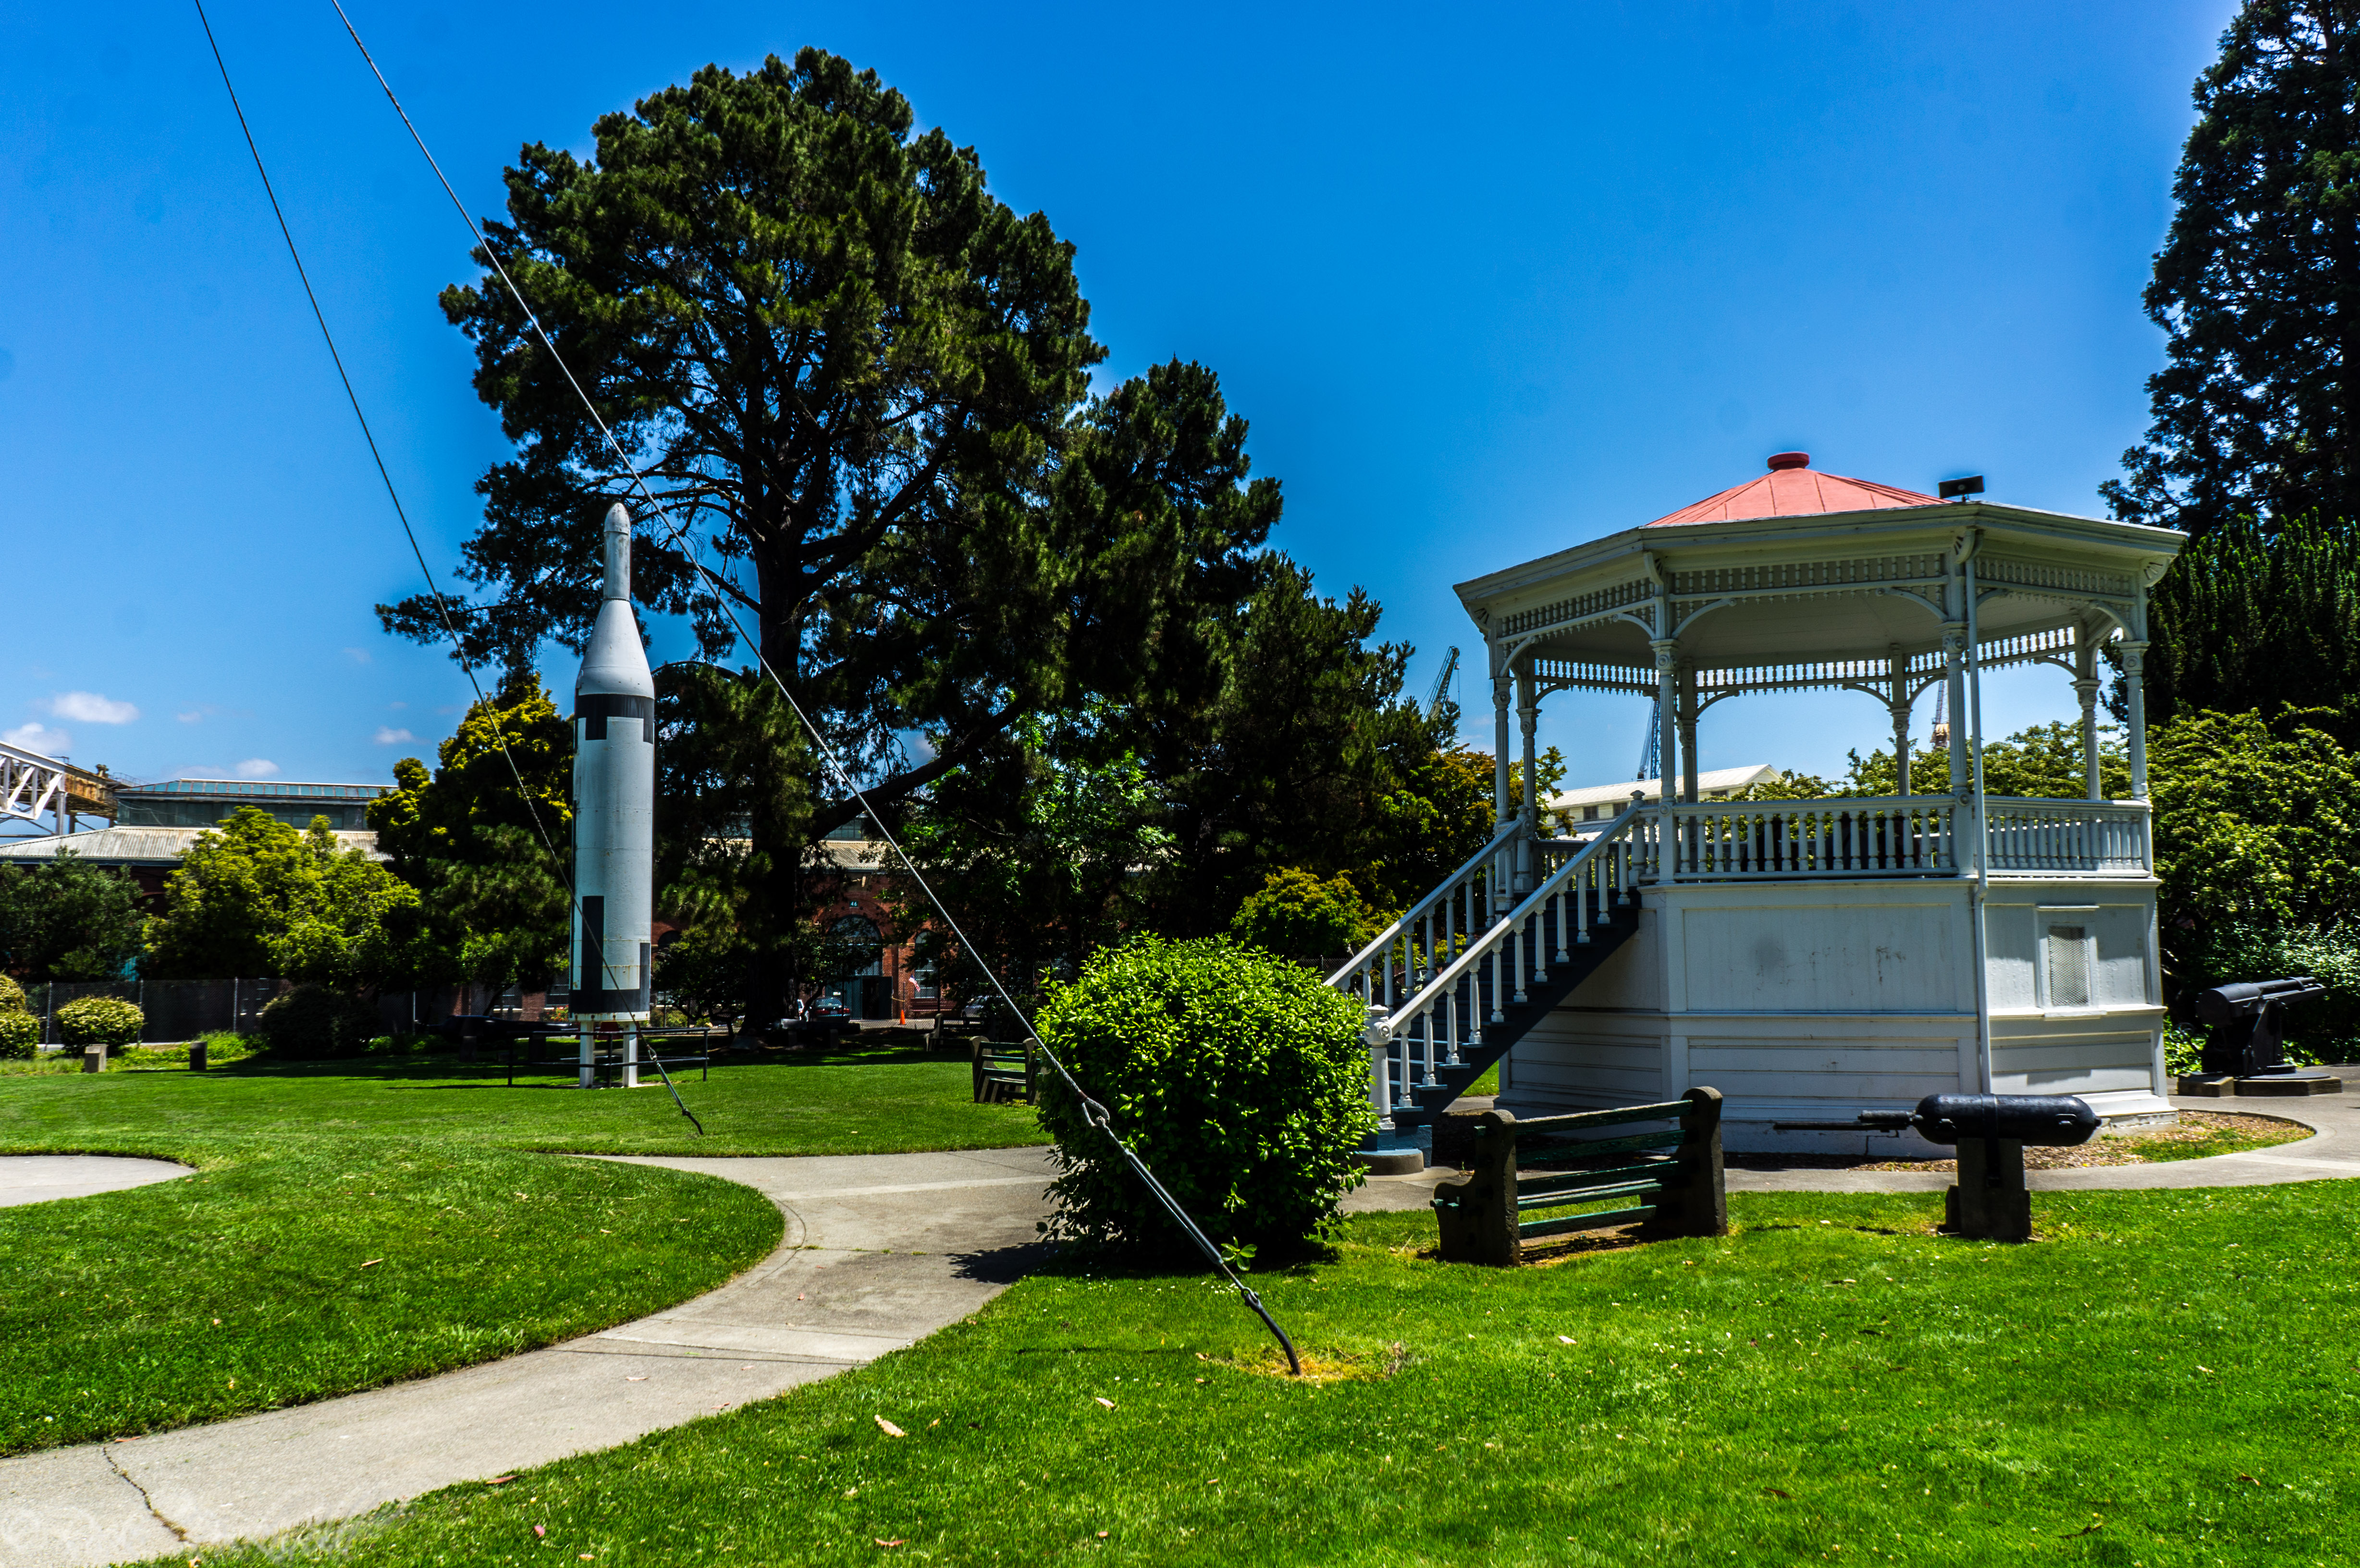 Photo of Alden Park: an ideal park setting with historic Military firepower